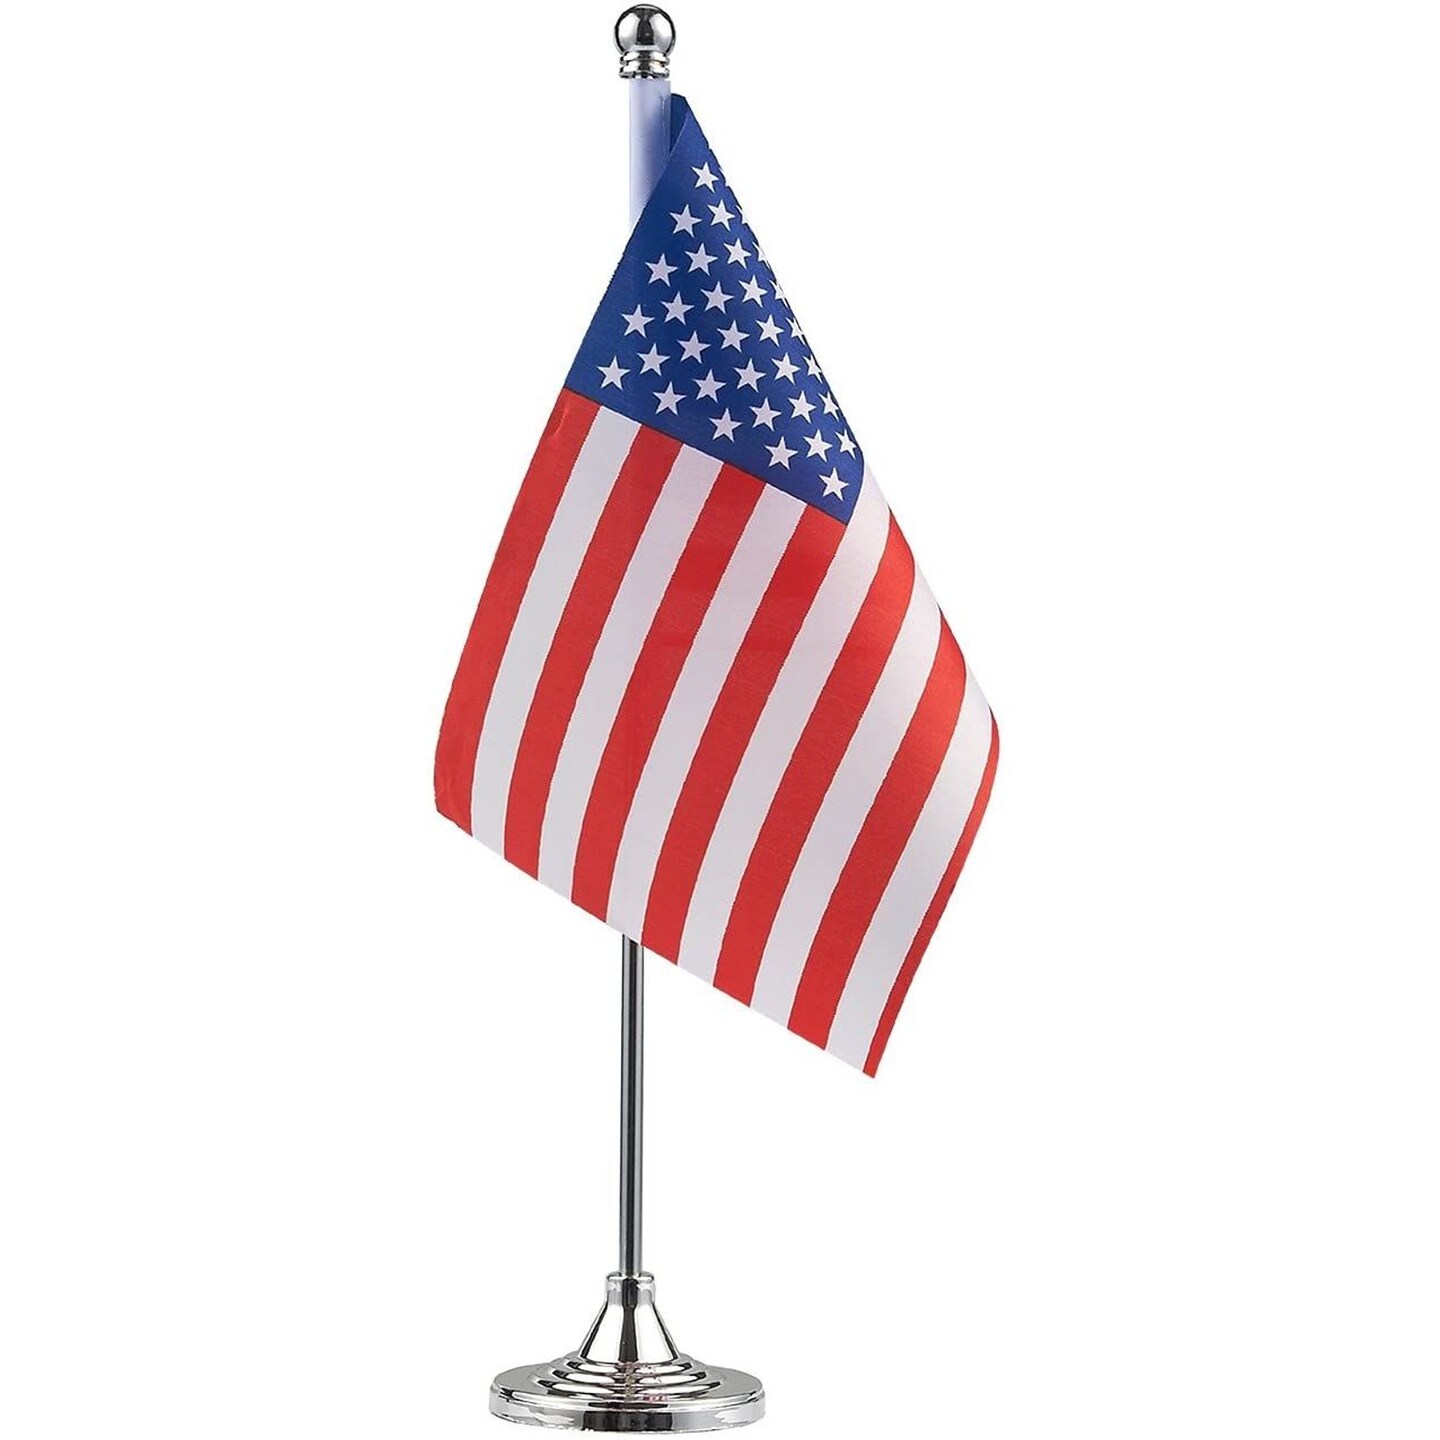 Juvale US Flag Stand - American Flag Metal Base, USA Flag Desk, Table Decoration, 8 x 5.5 inches